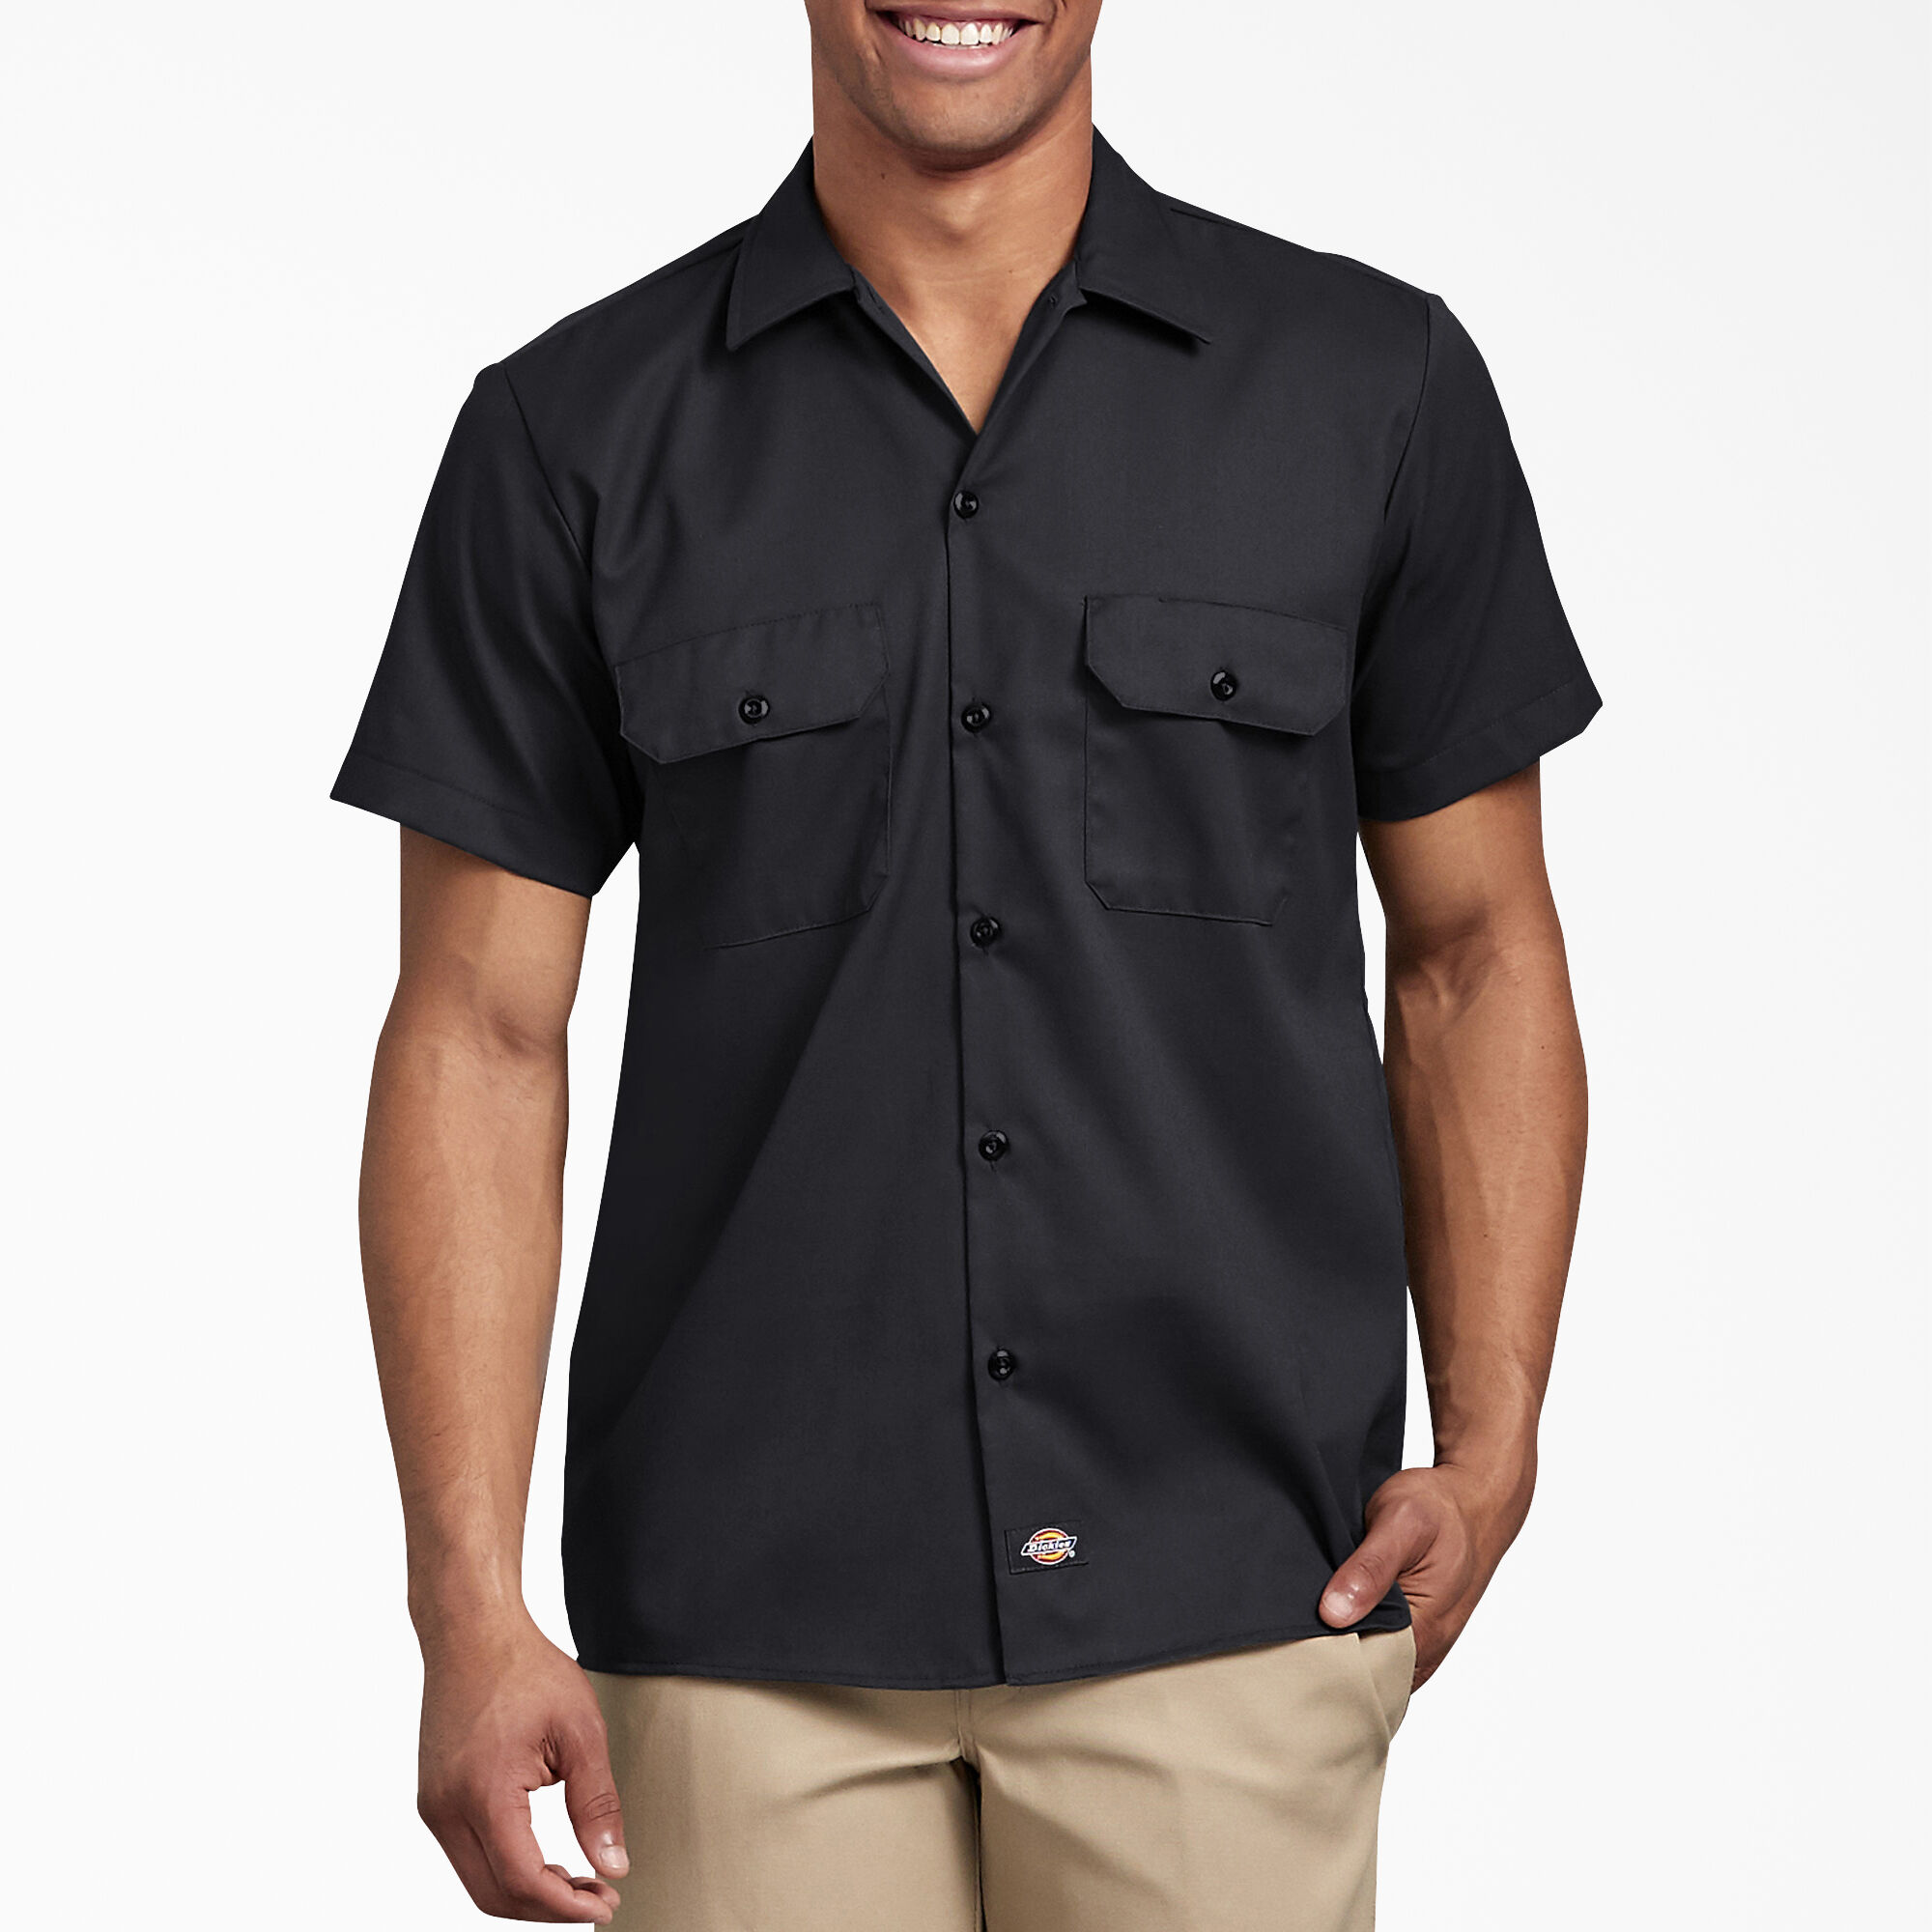 Sizes S-XXXXL Men's Work Top Dickies Worker Polo Shirt TWIN PACK Black 